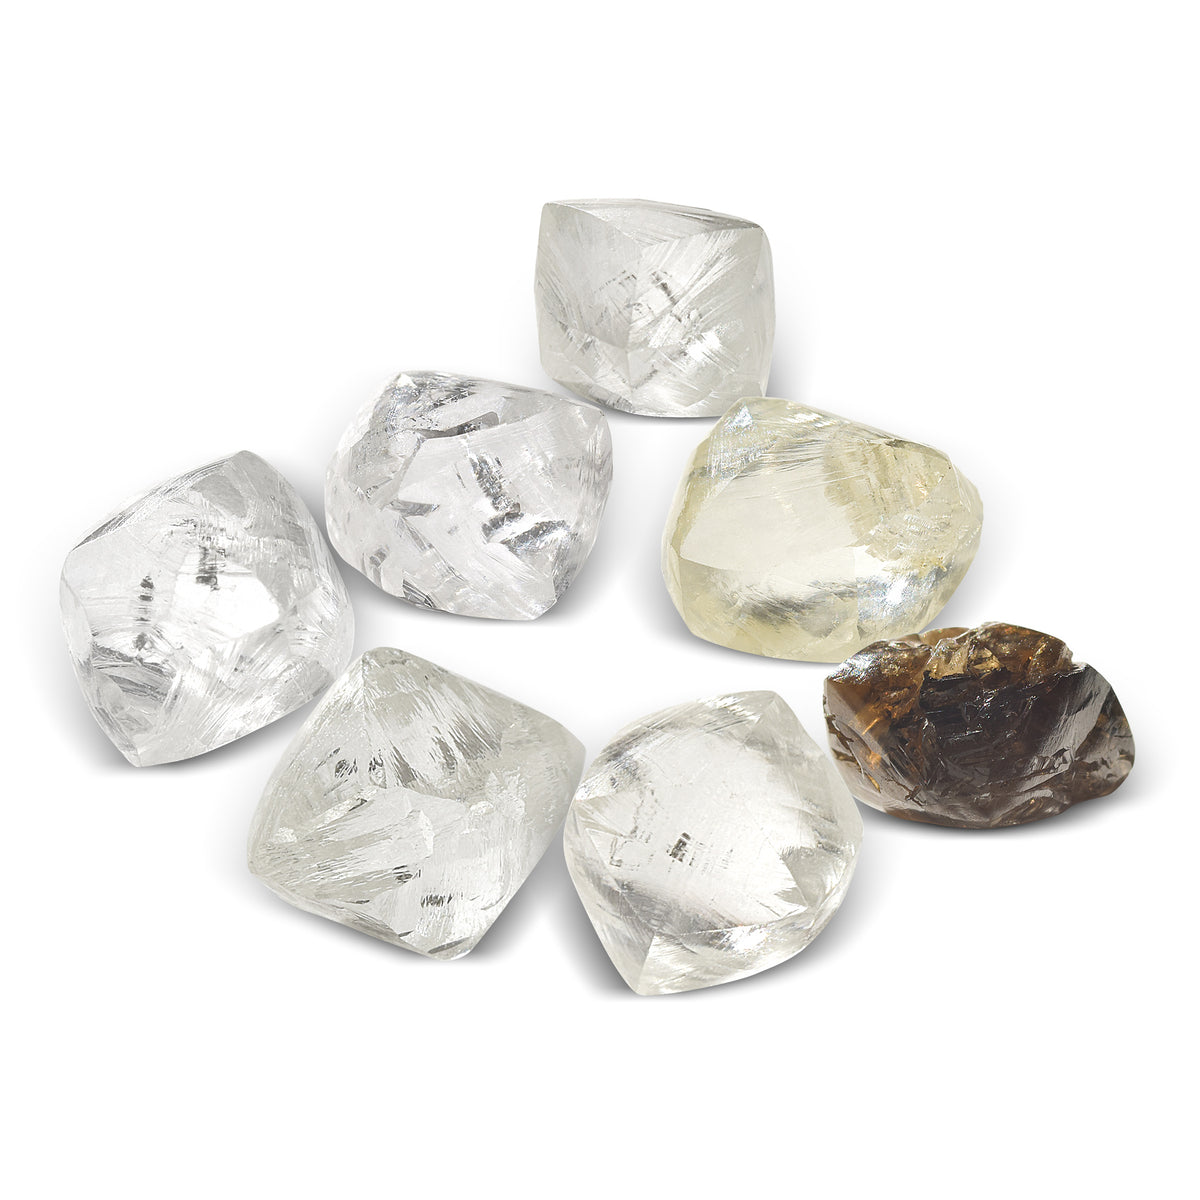 Diamond & Gem Buying Guide: How to Choose Your Rough Diamond – The ...